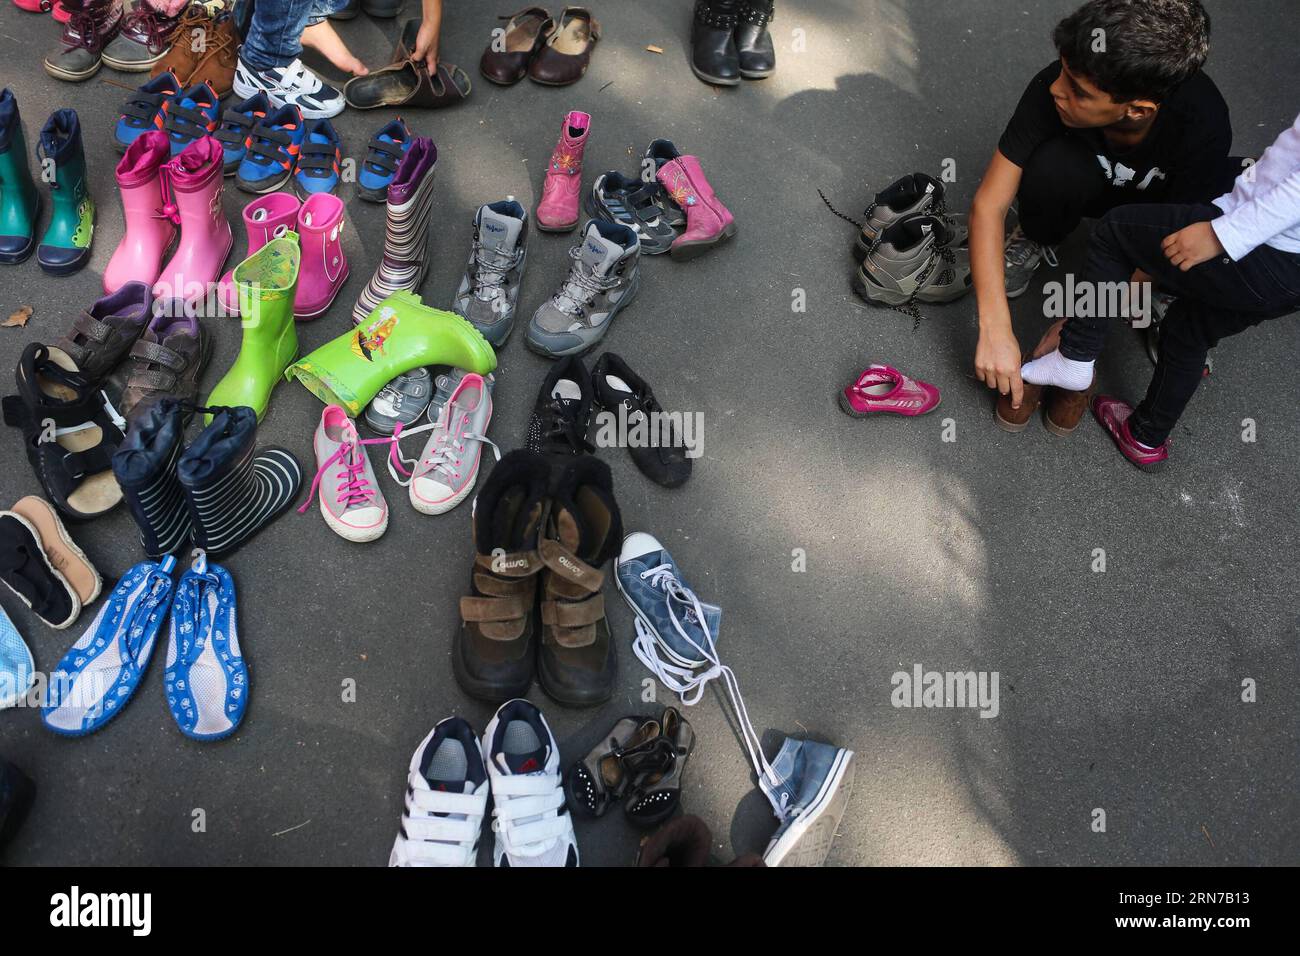 150901) -- BERLIN, Sept. 1, 2015 -- Children try used shoes at the  reception center for refugees and asylum-seekers in Berlin, Germany, on  Sept. 1, 2015. German Chancellor Angela Merkel urged here